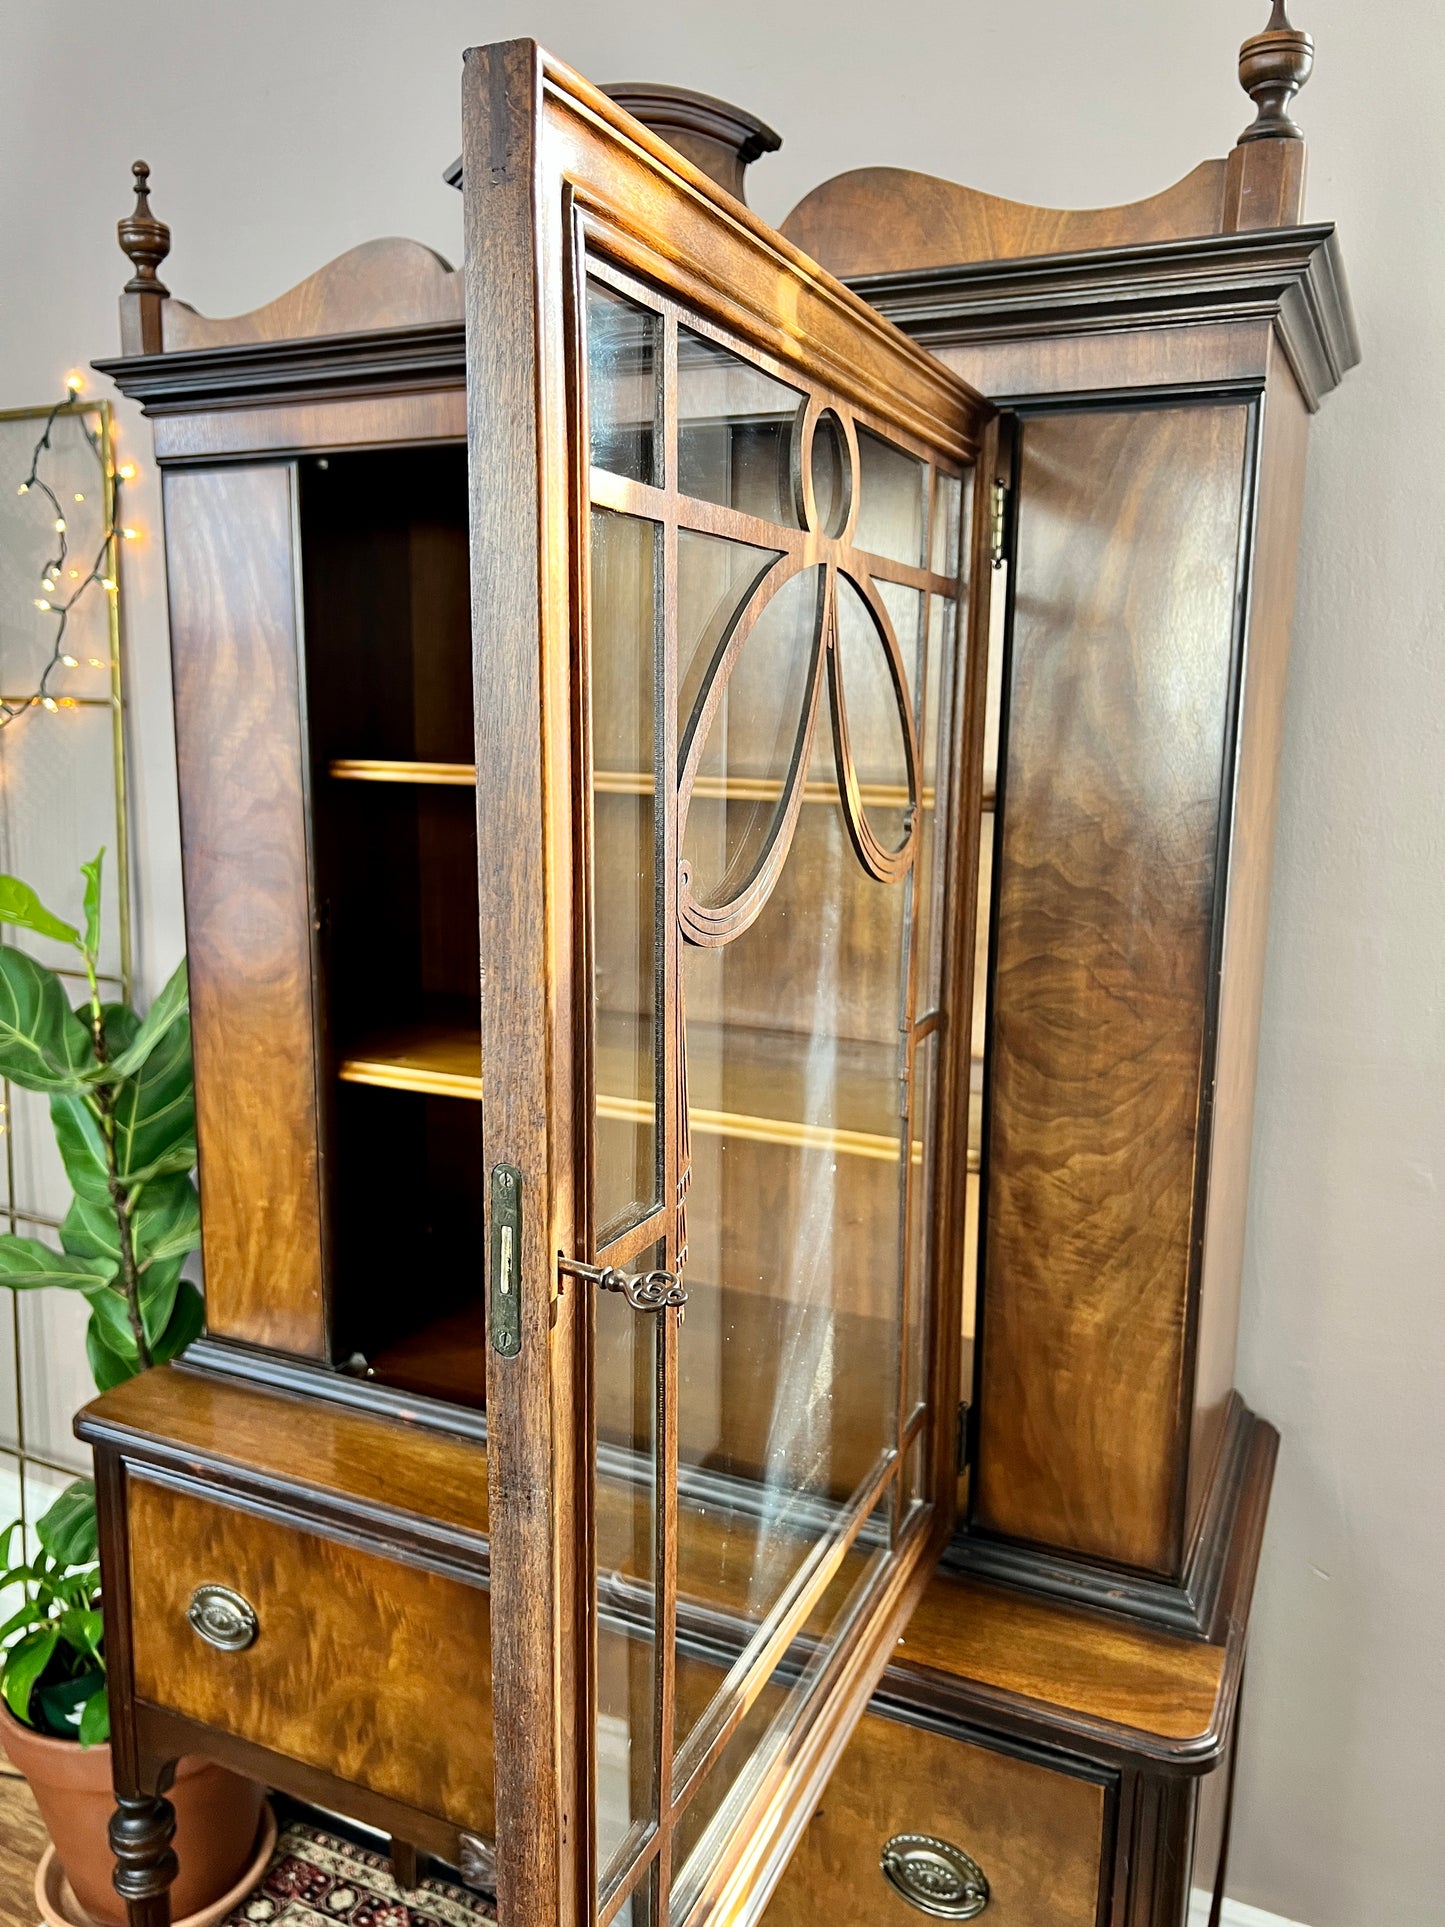 The Mariposa Cabinet